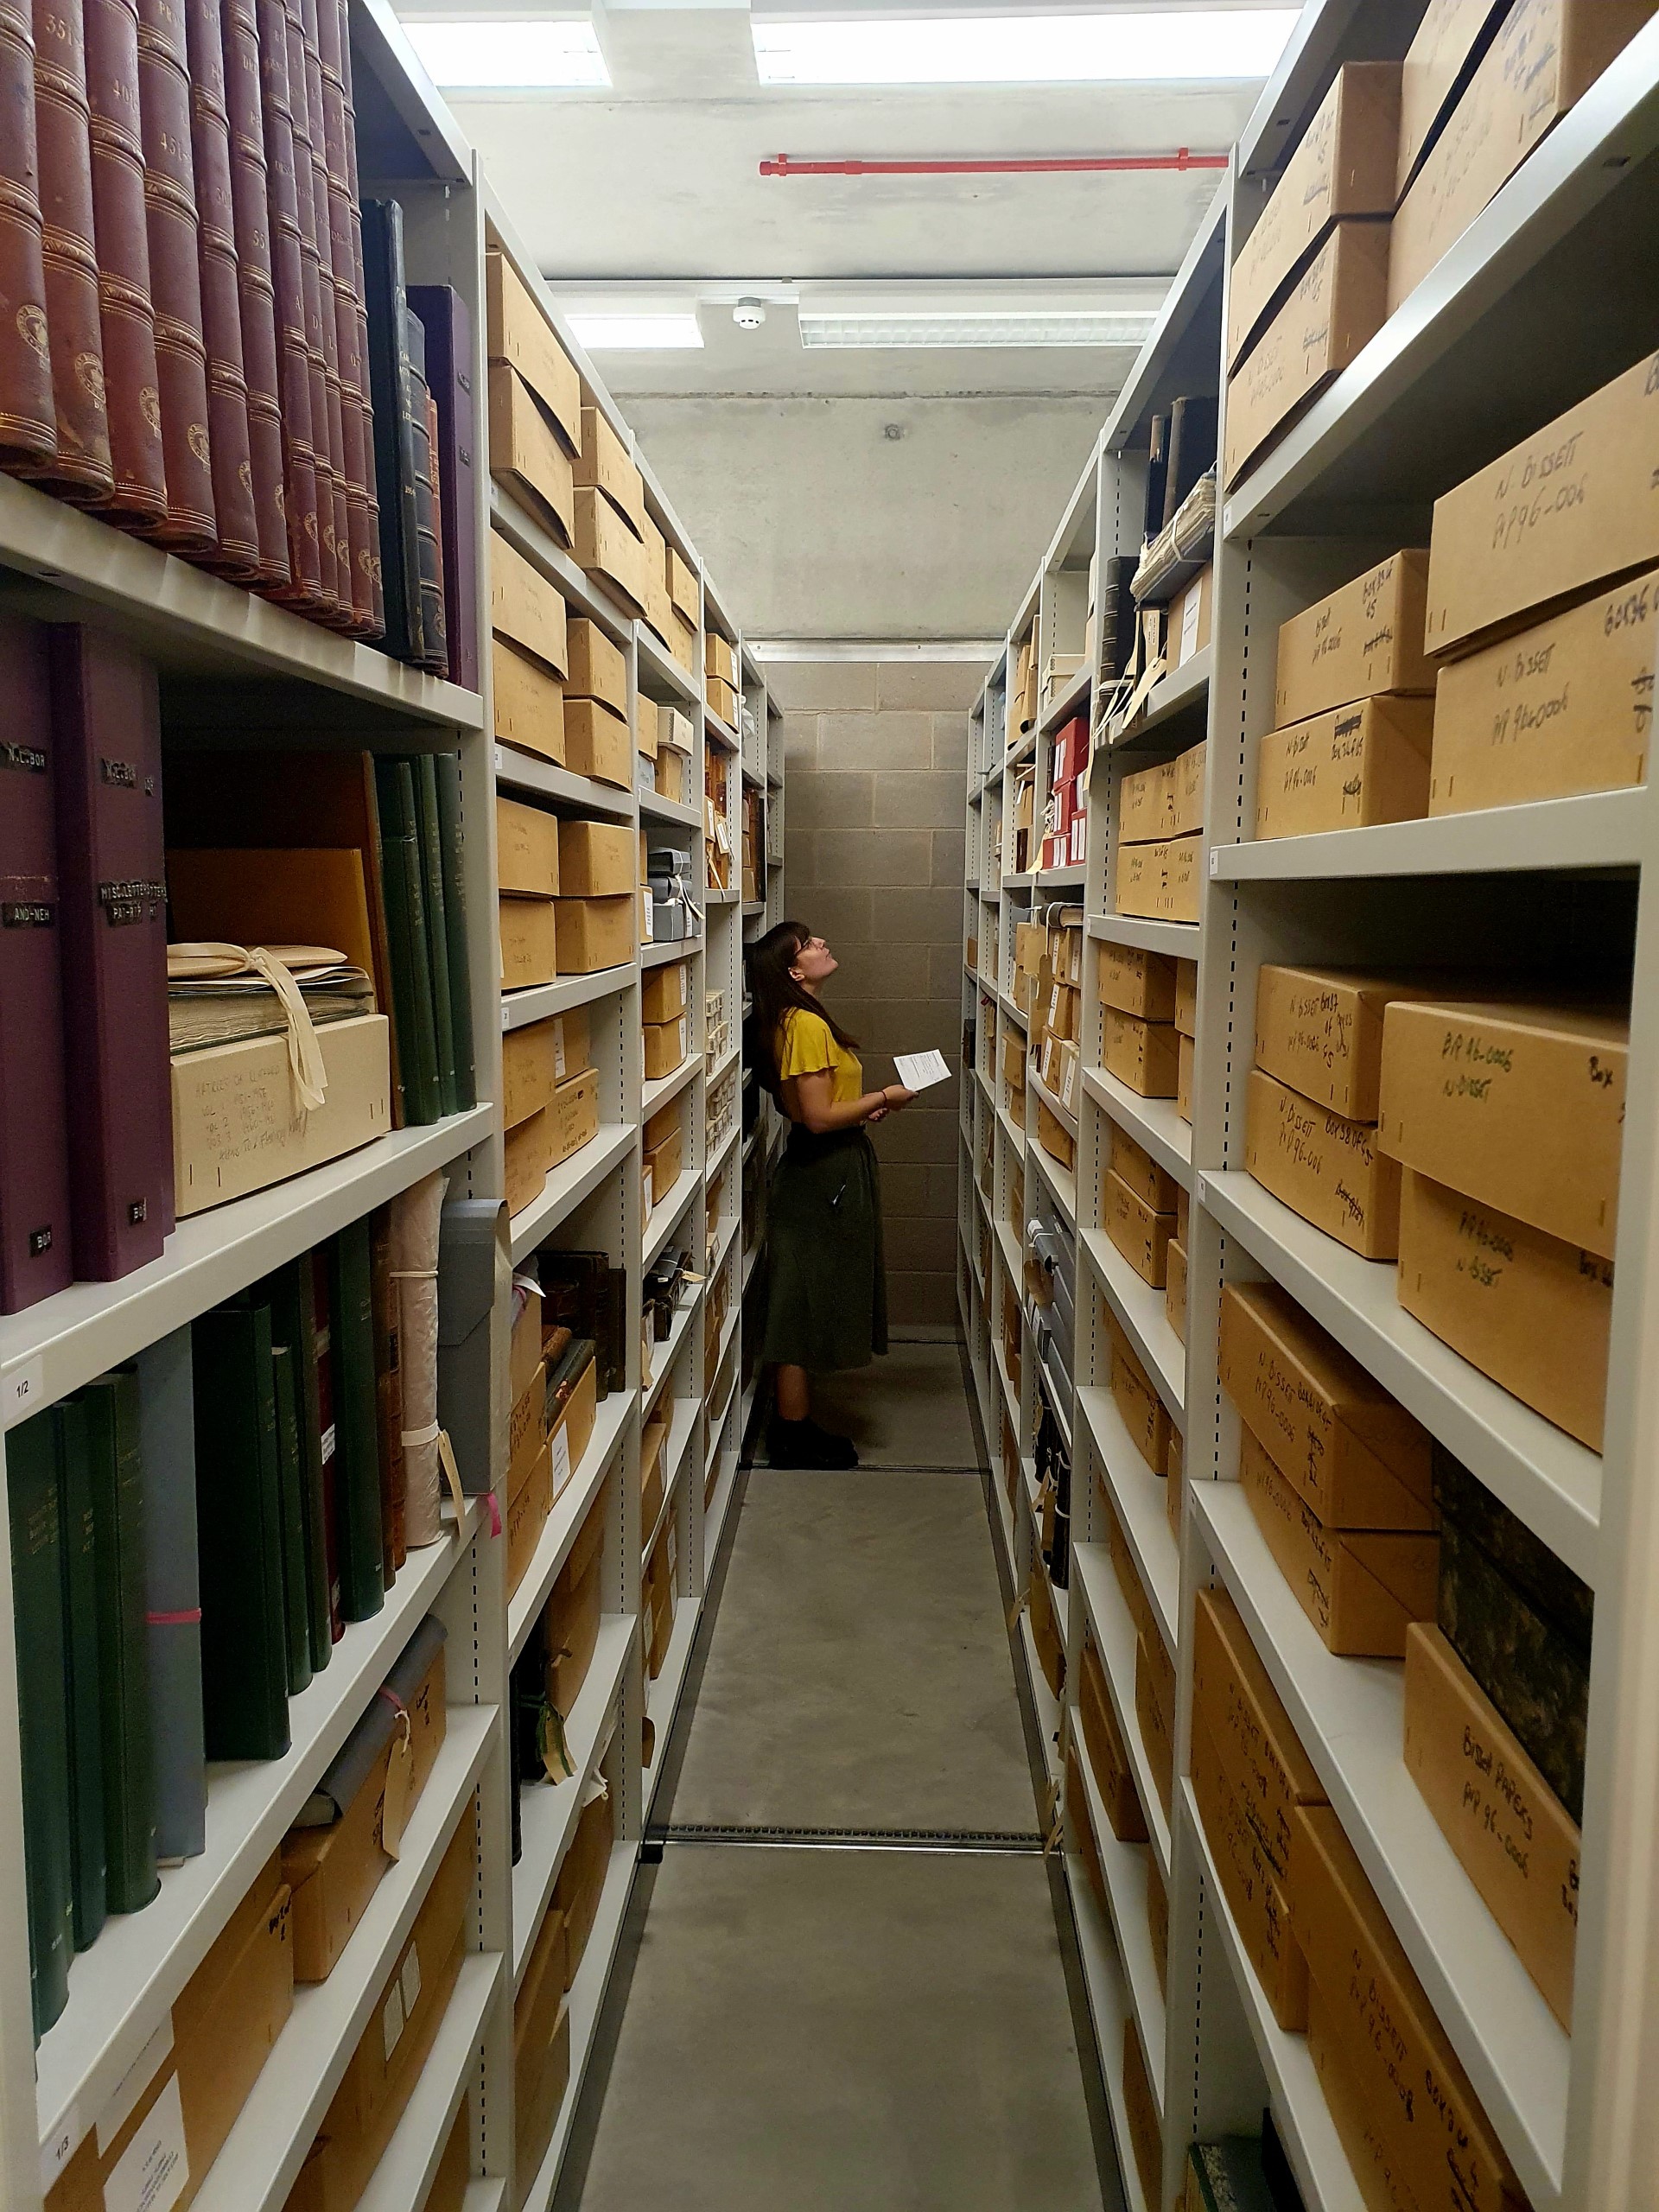 Down a long corridor of full shelves containing books and records, a researcher looks to the resources.